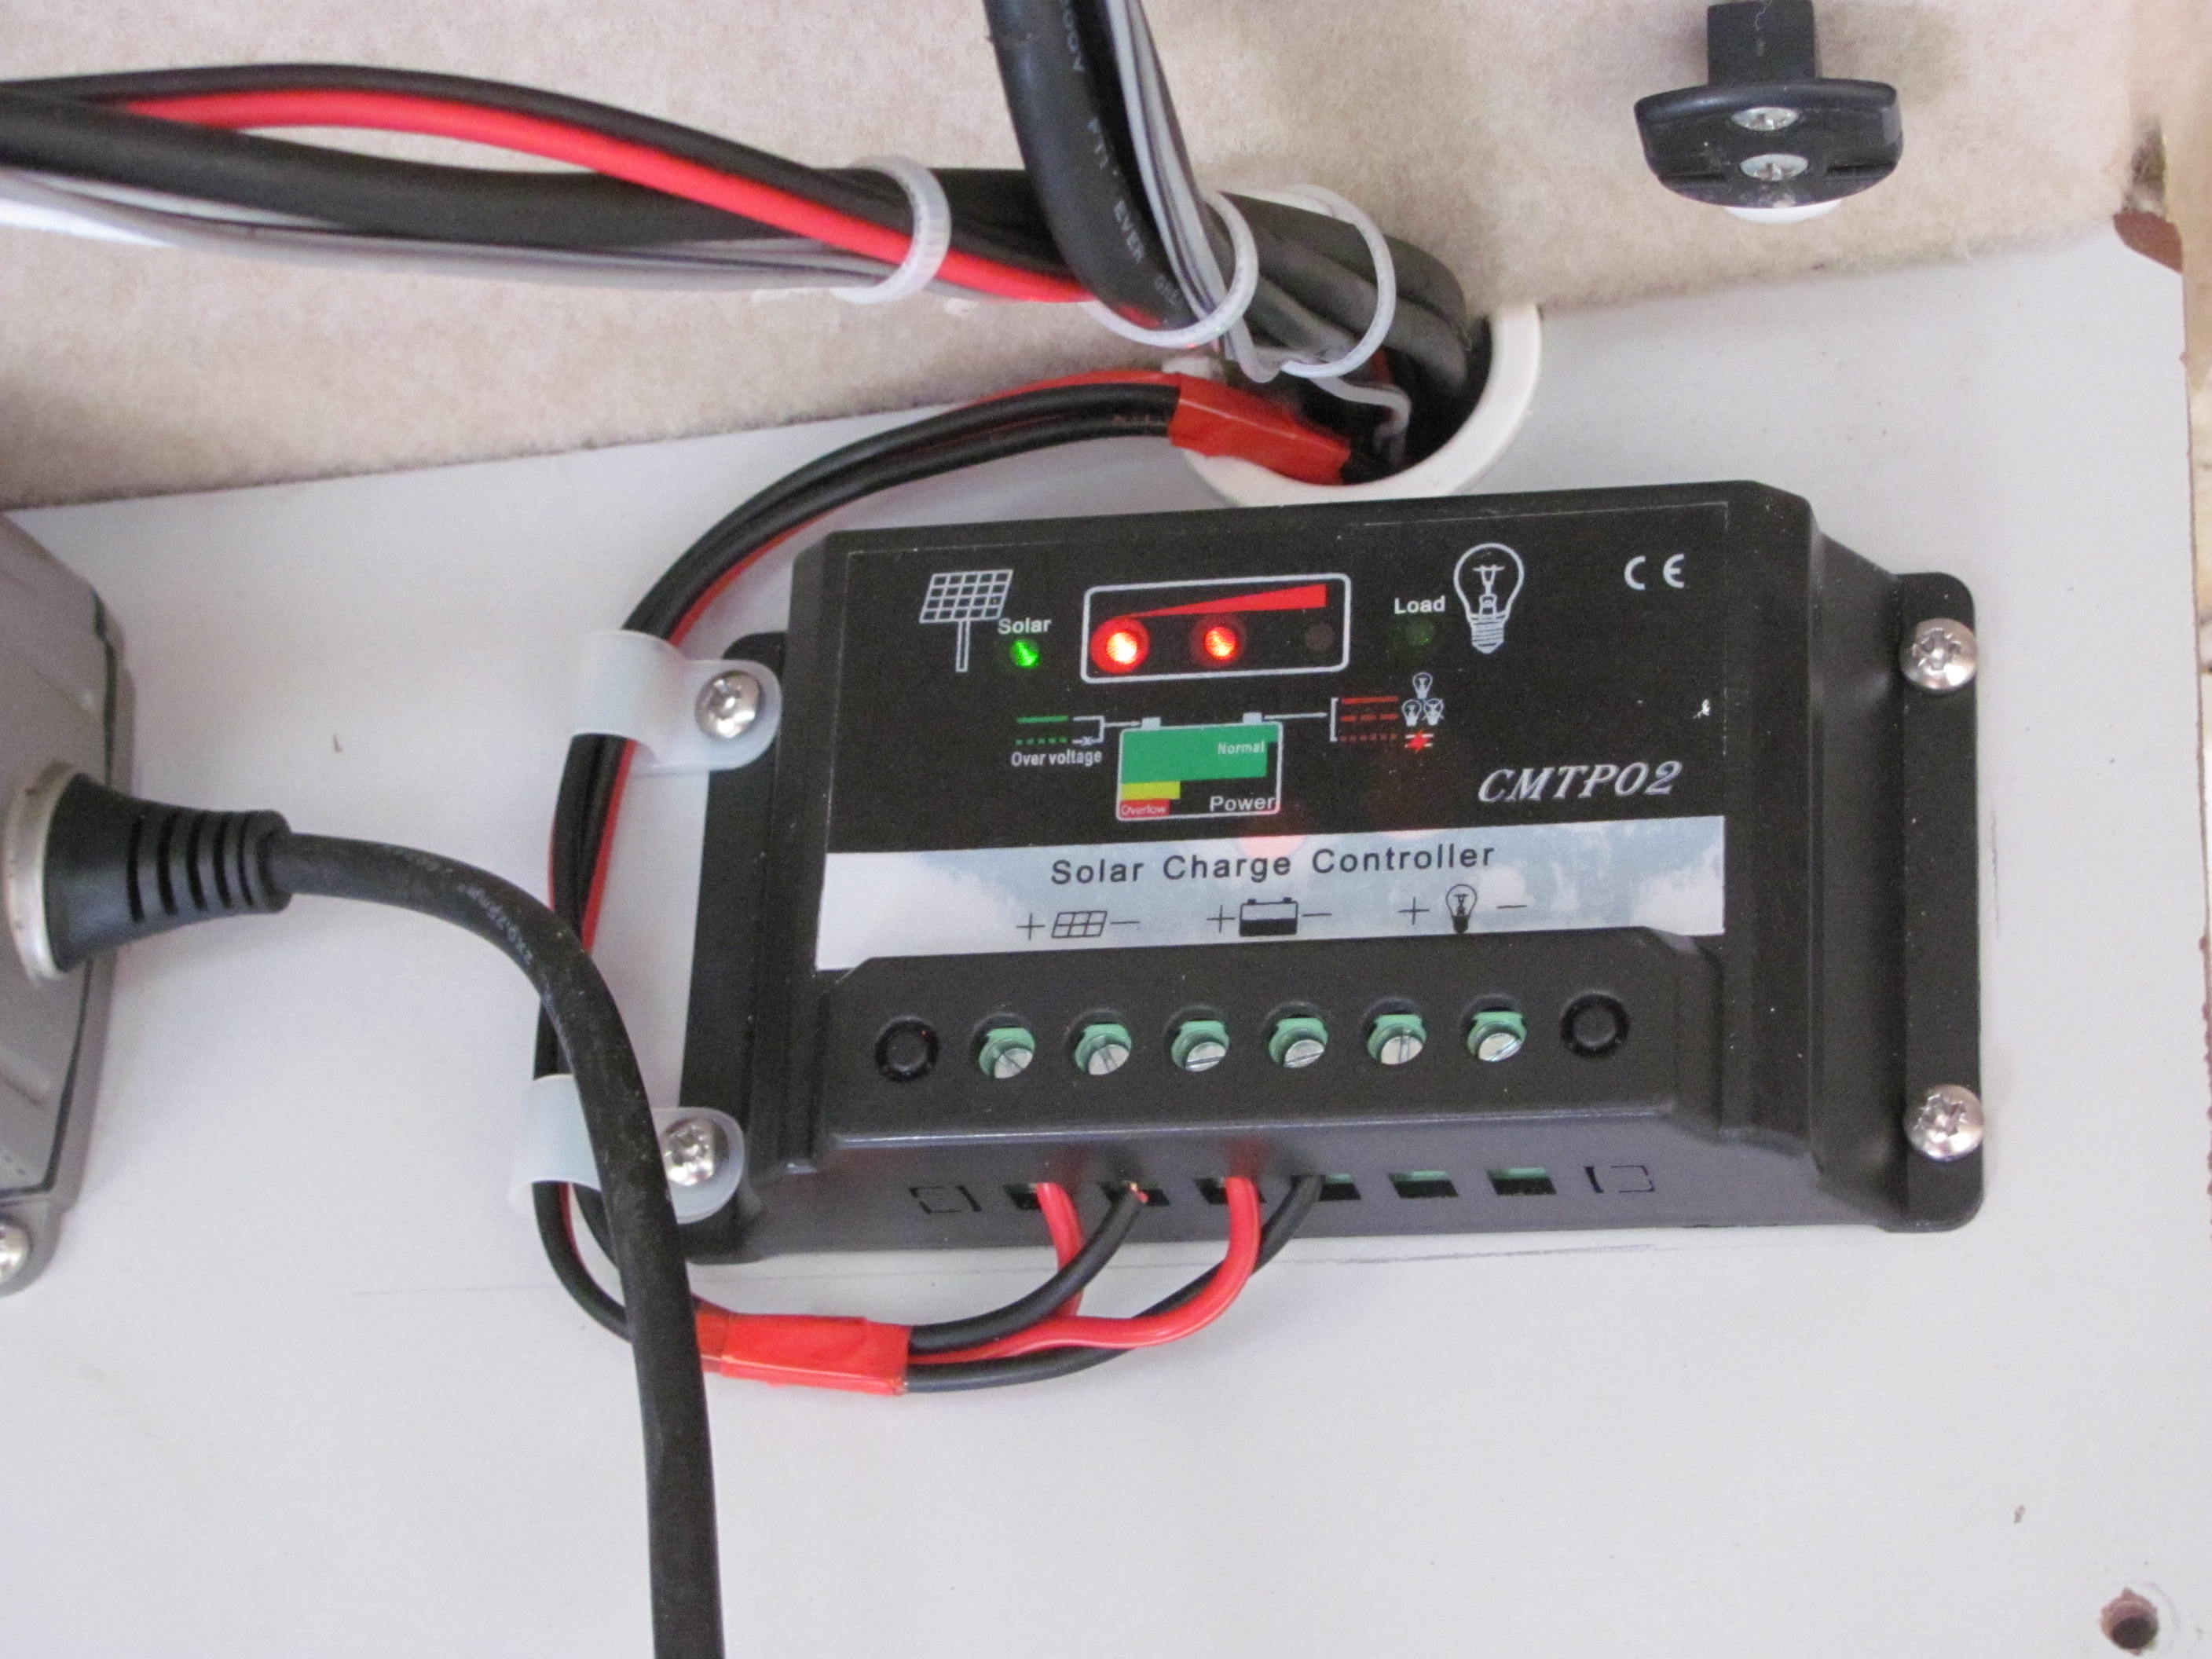 outback charge controller fm60 wiring diagram